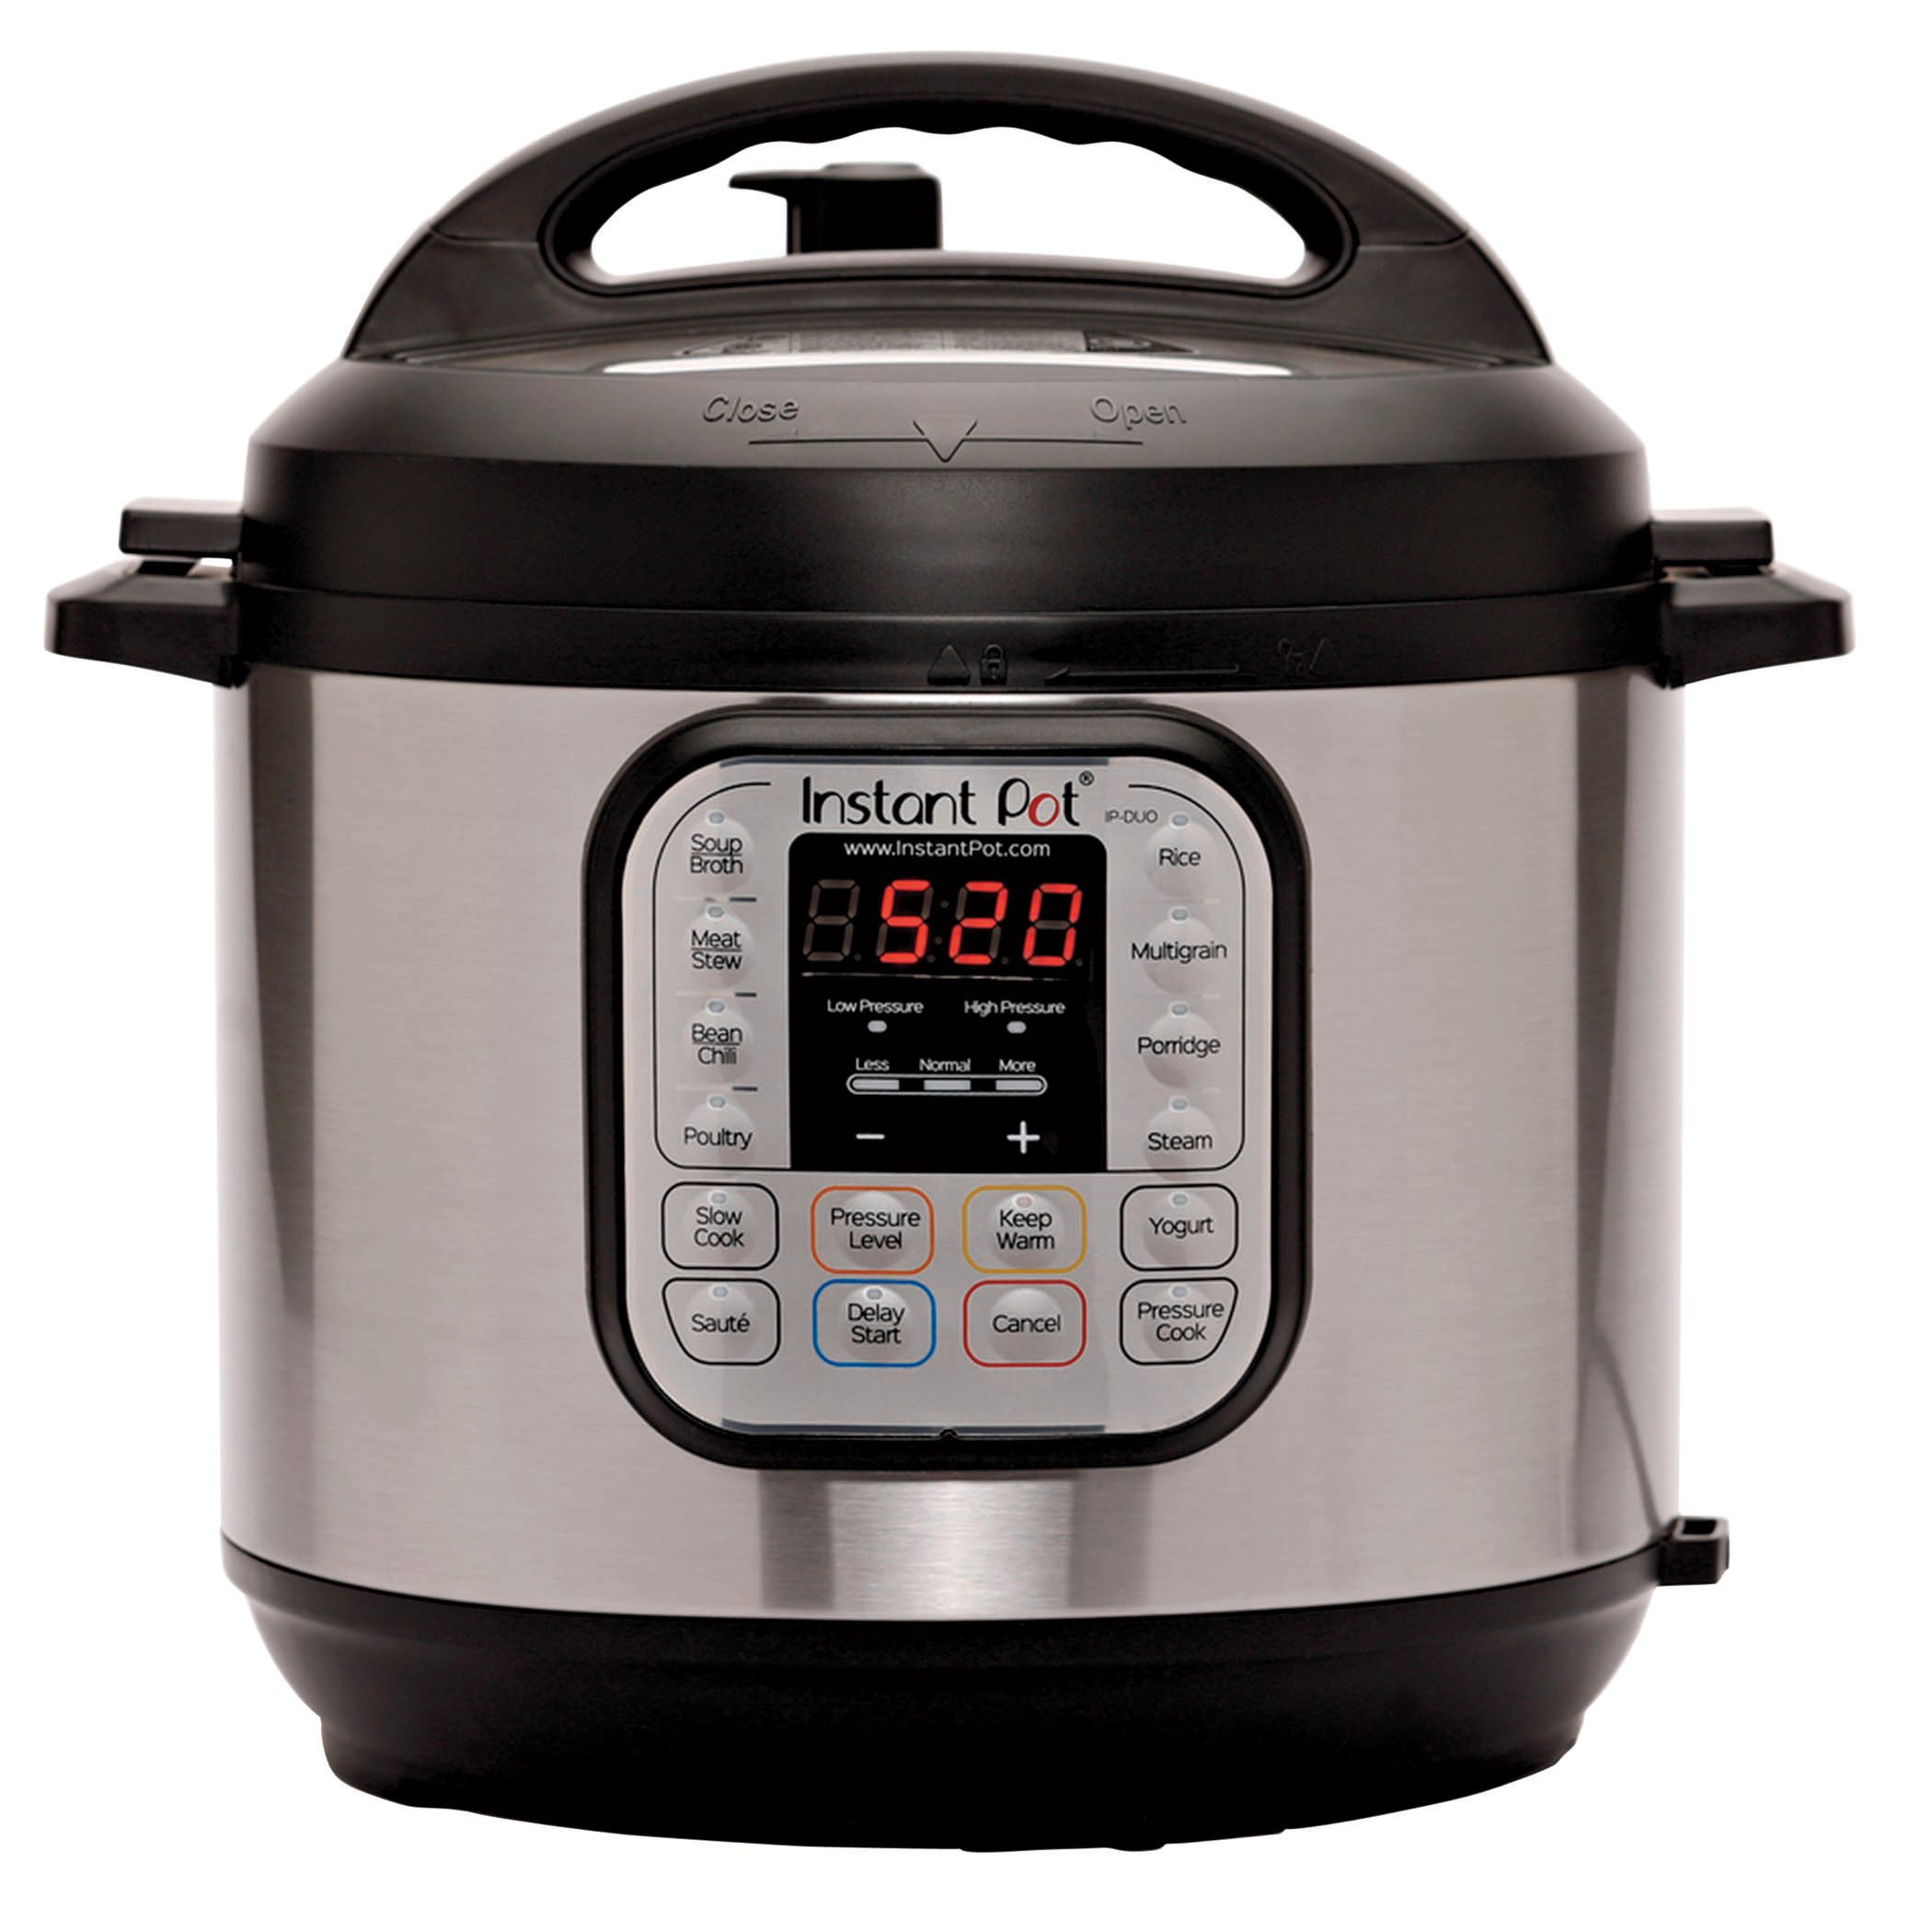 Instant Pot 6 Qt Duo 60 7-in-1 Multi Use Programmable Pressure Cooker 